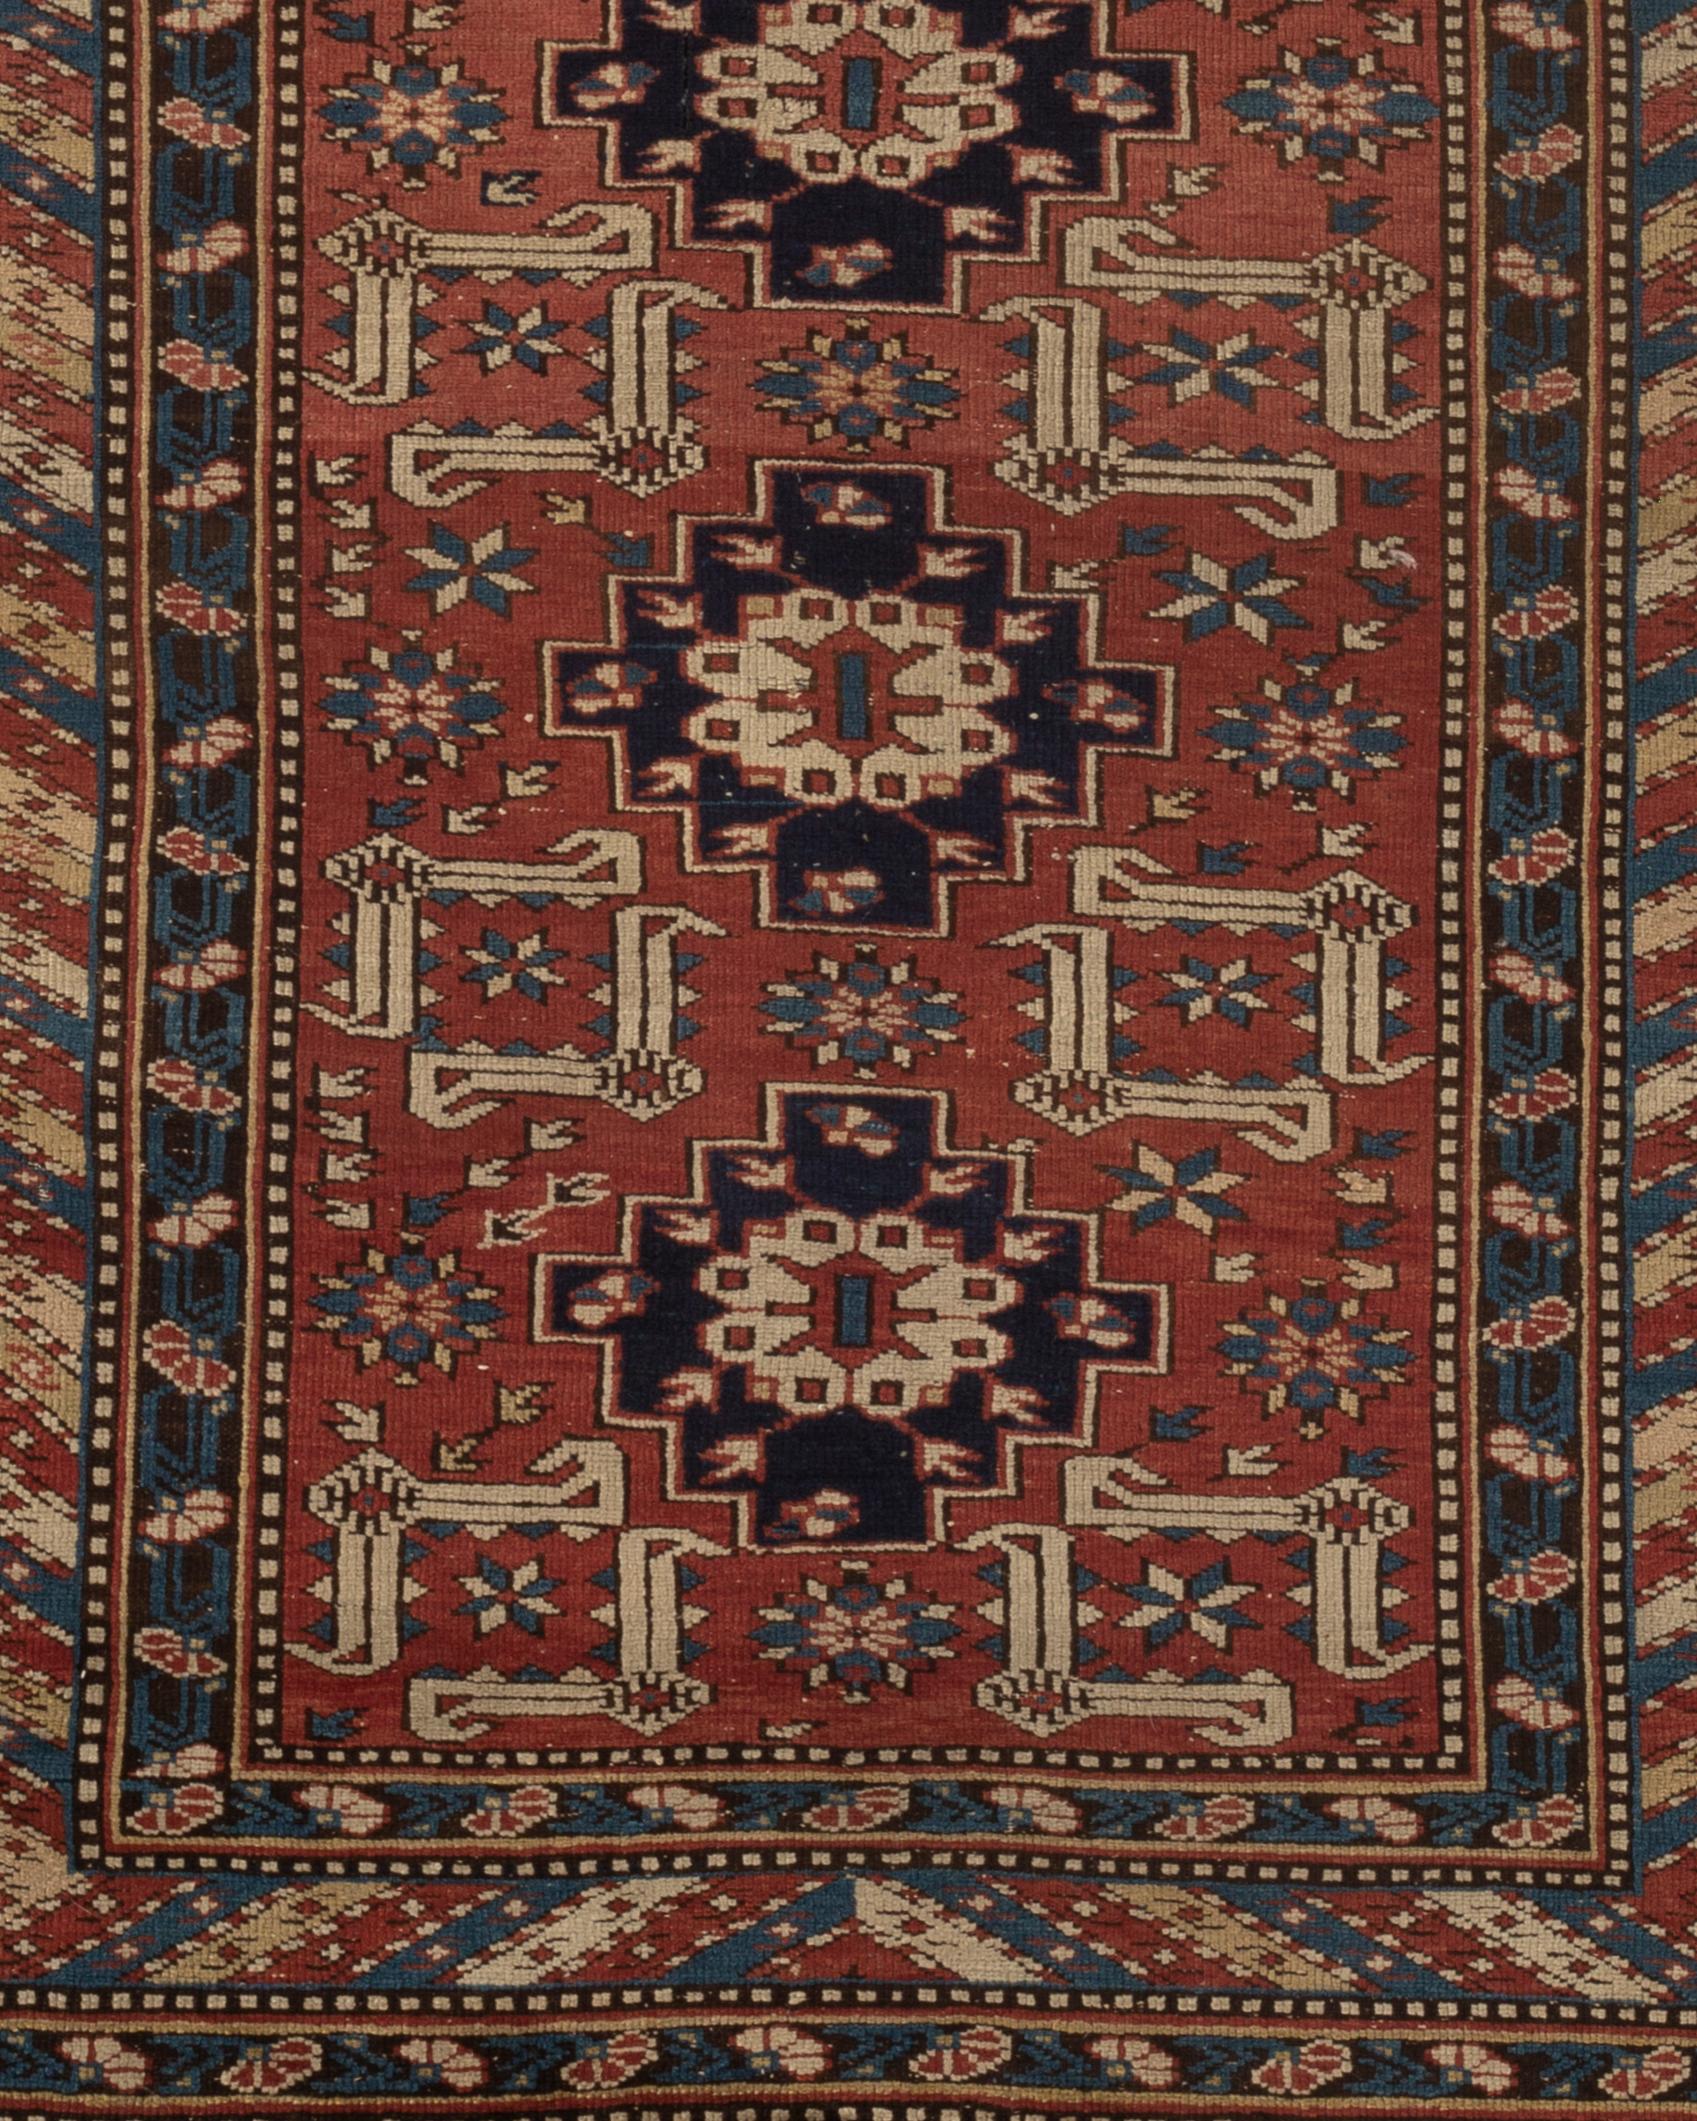 Antique Caucasian Perpedil Shirvan rug circa 1880 from the town of the same name situated to the southeast of Kuba in the Caucasian region of Daghestan. Featuring the distinctive ram's Horn design associated with rugs from this area on a rust ground